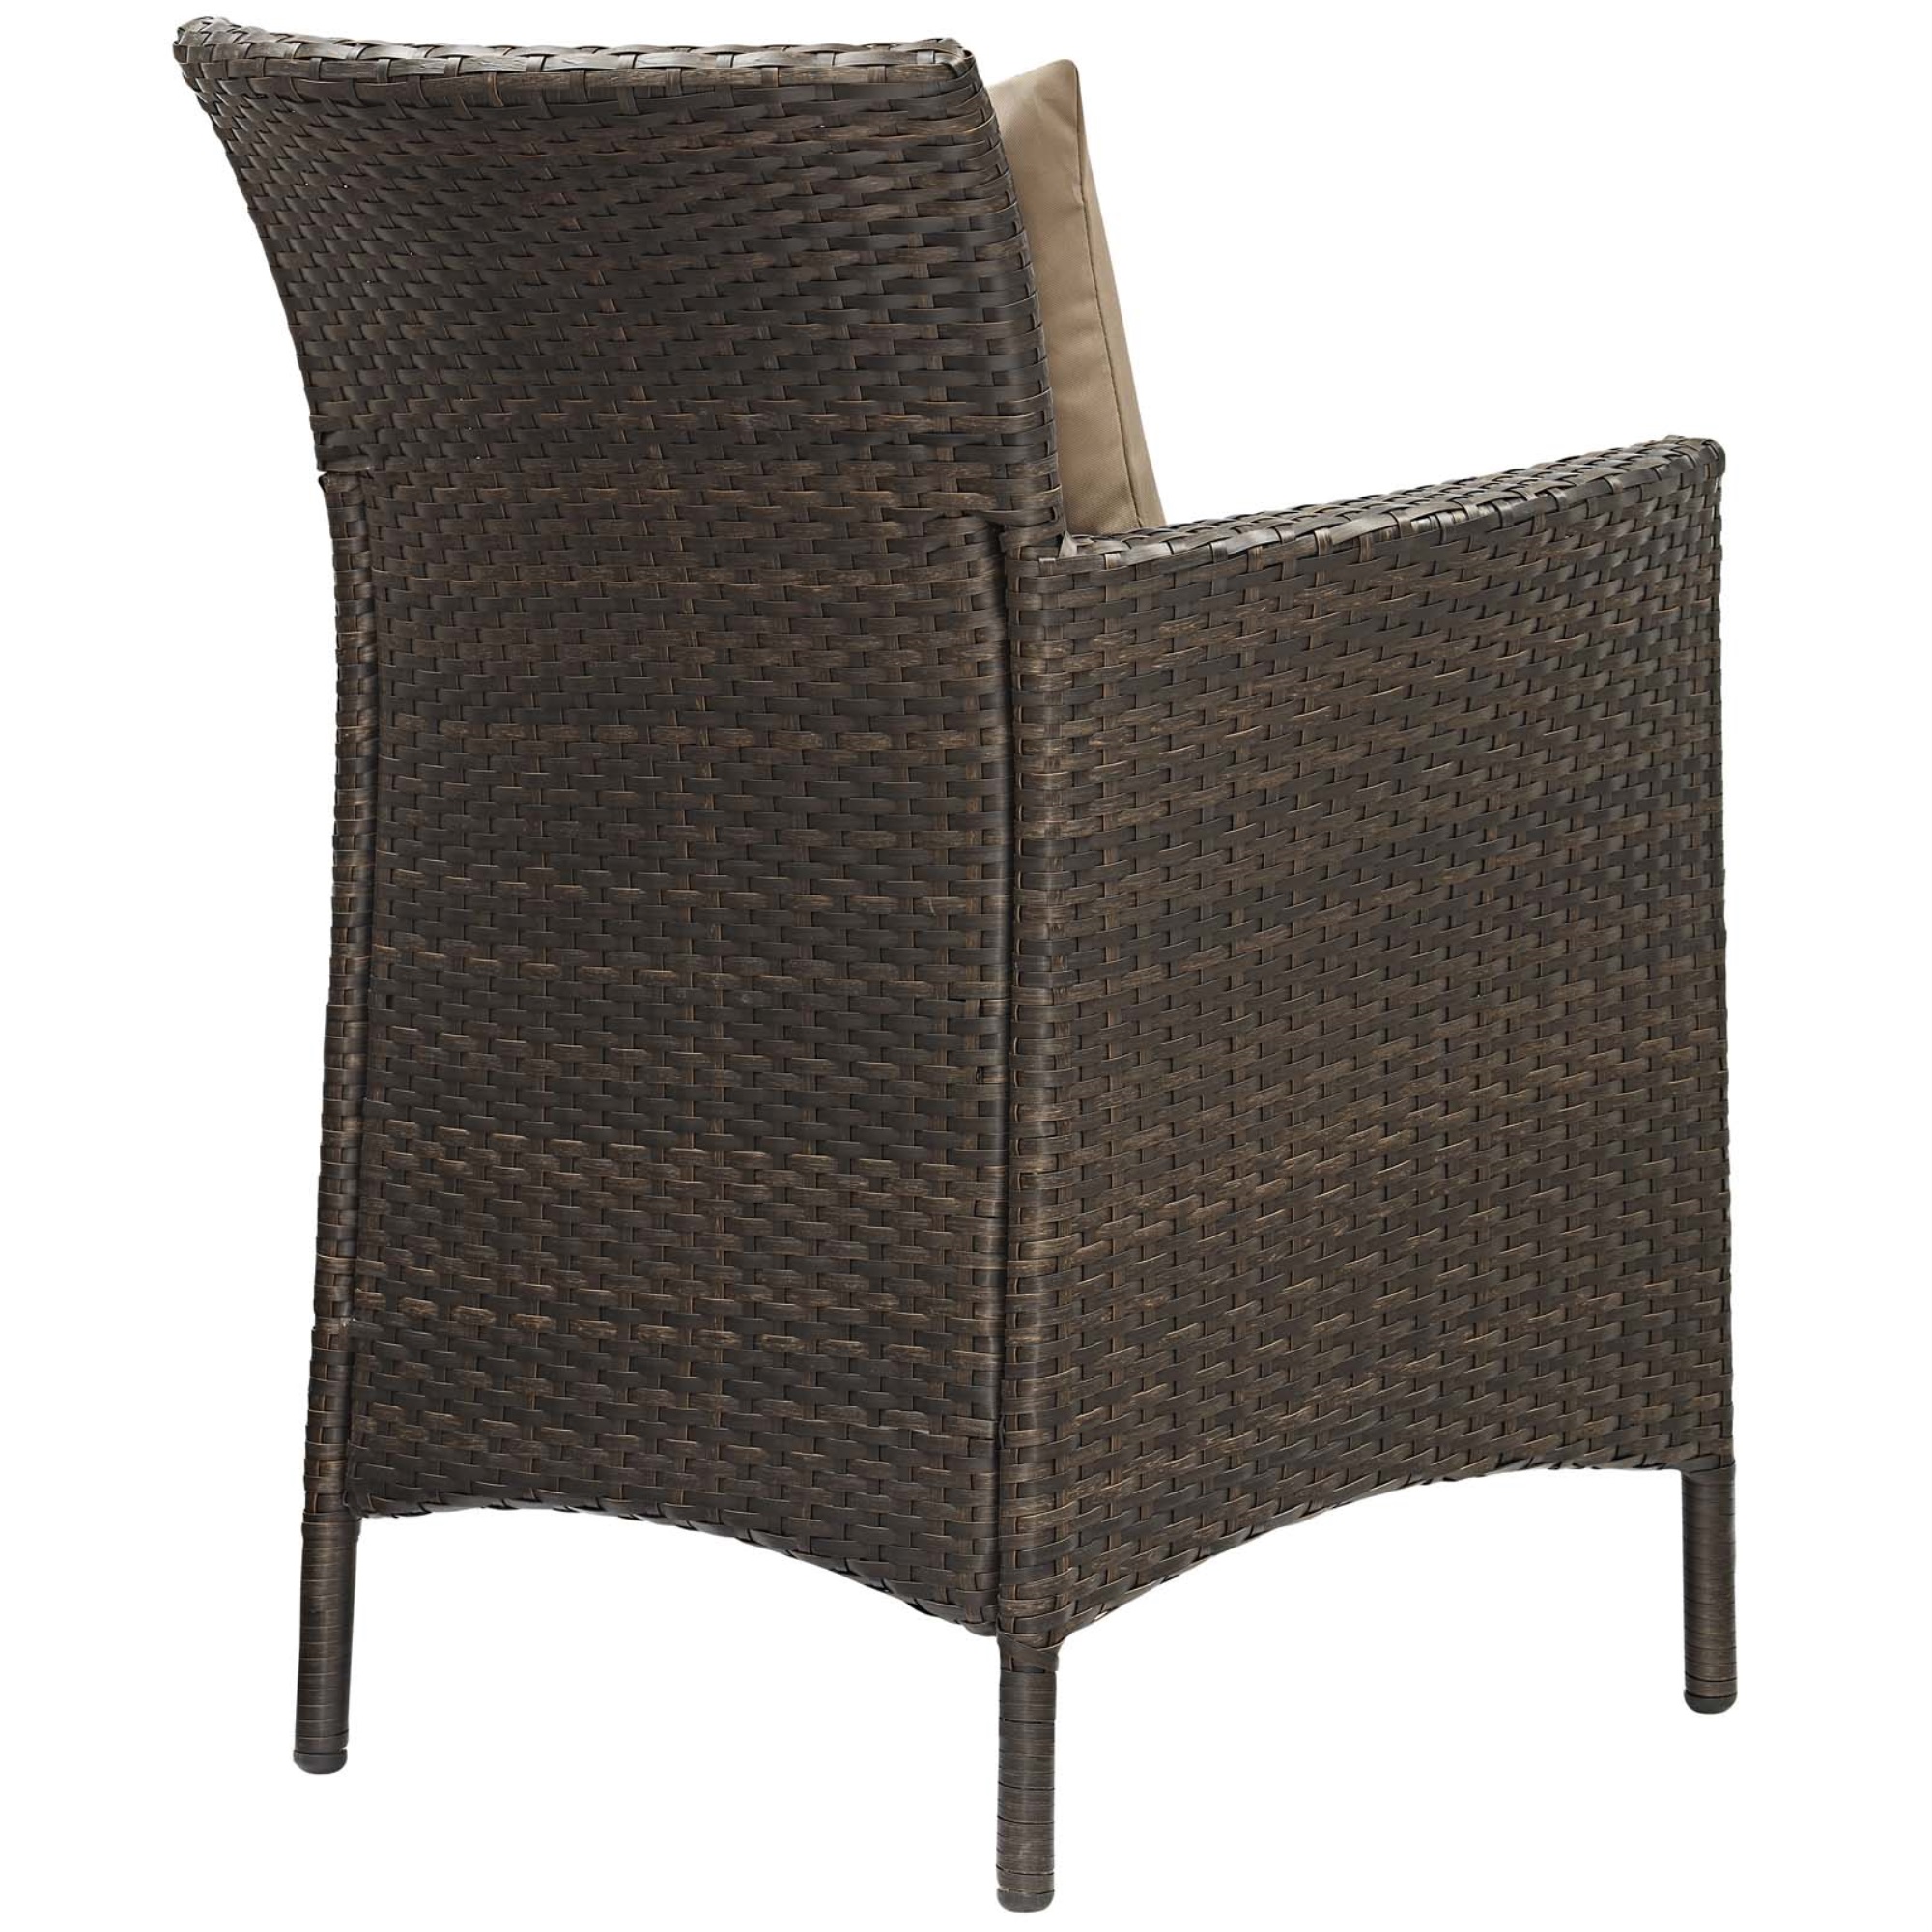 Modway Conduit 7-Piece Modern Rattan Outdoor Dining Set in Brown/Mocha - image 3 of 5